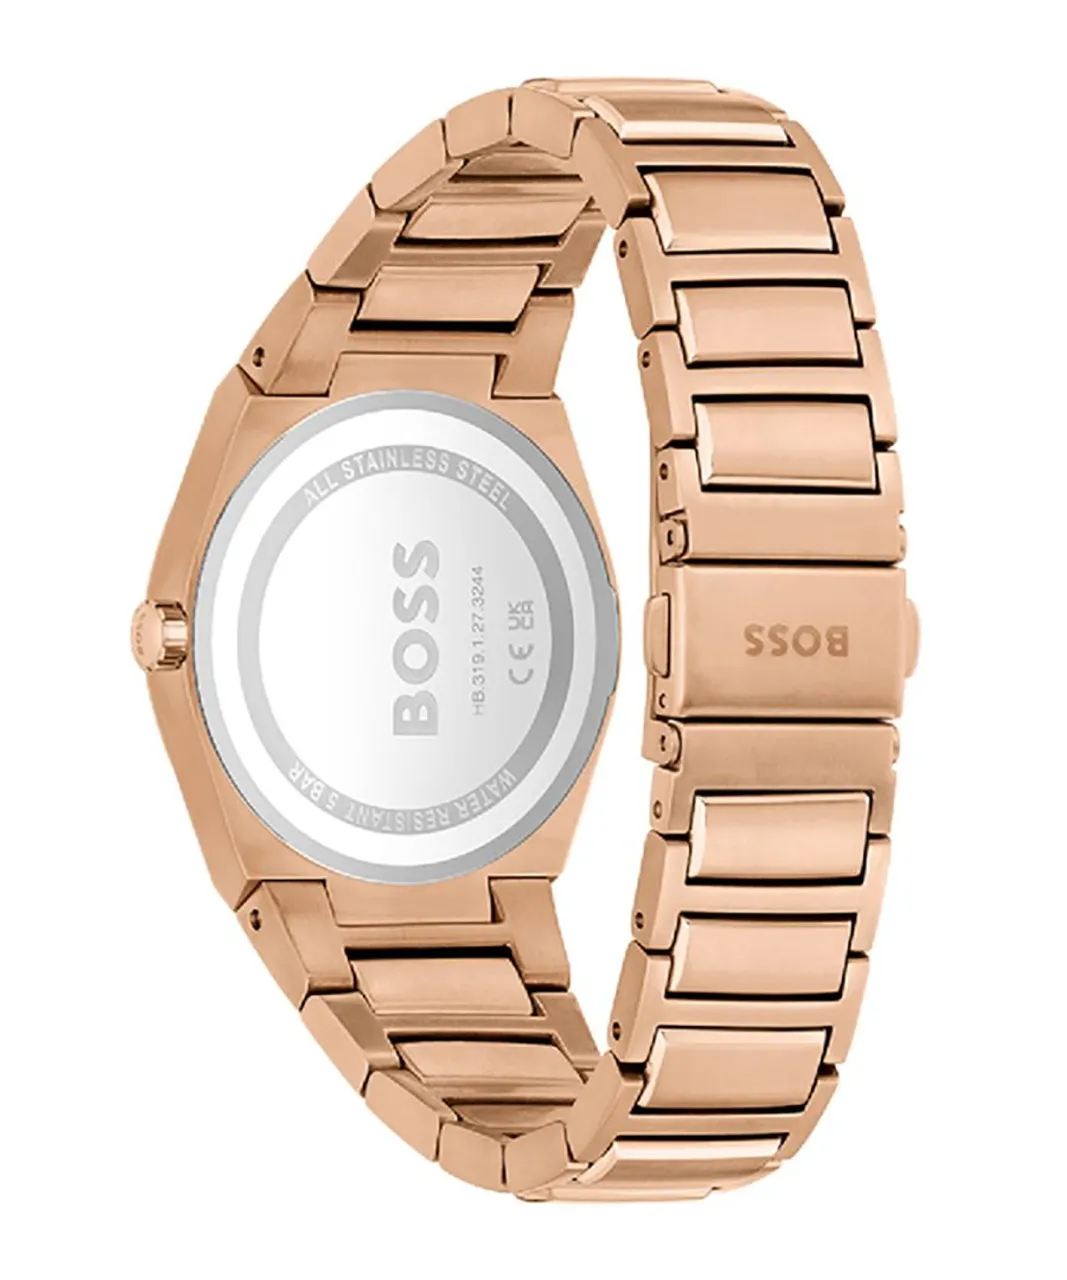 Hugo Boss Steer WoMens Rose Gold Watch 1502671 Stainless Steel (archived) - One Size